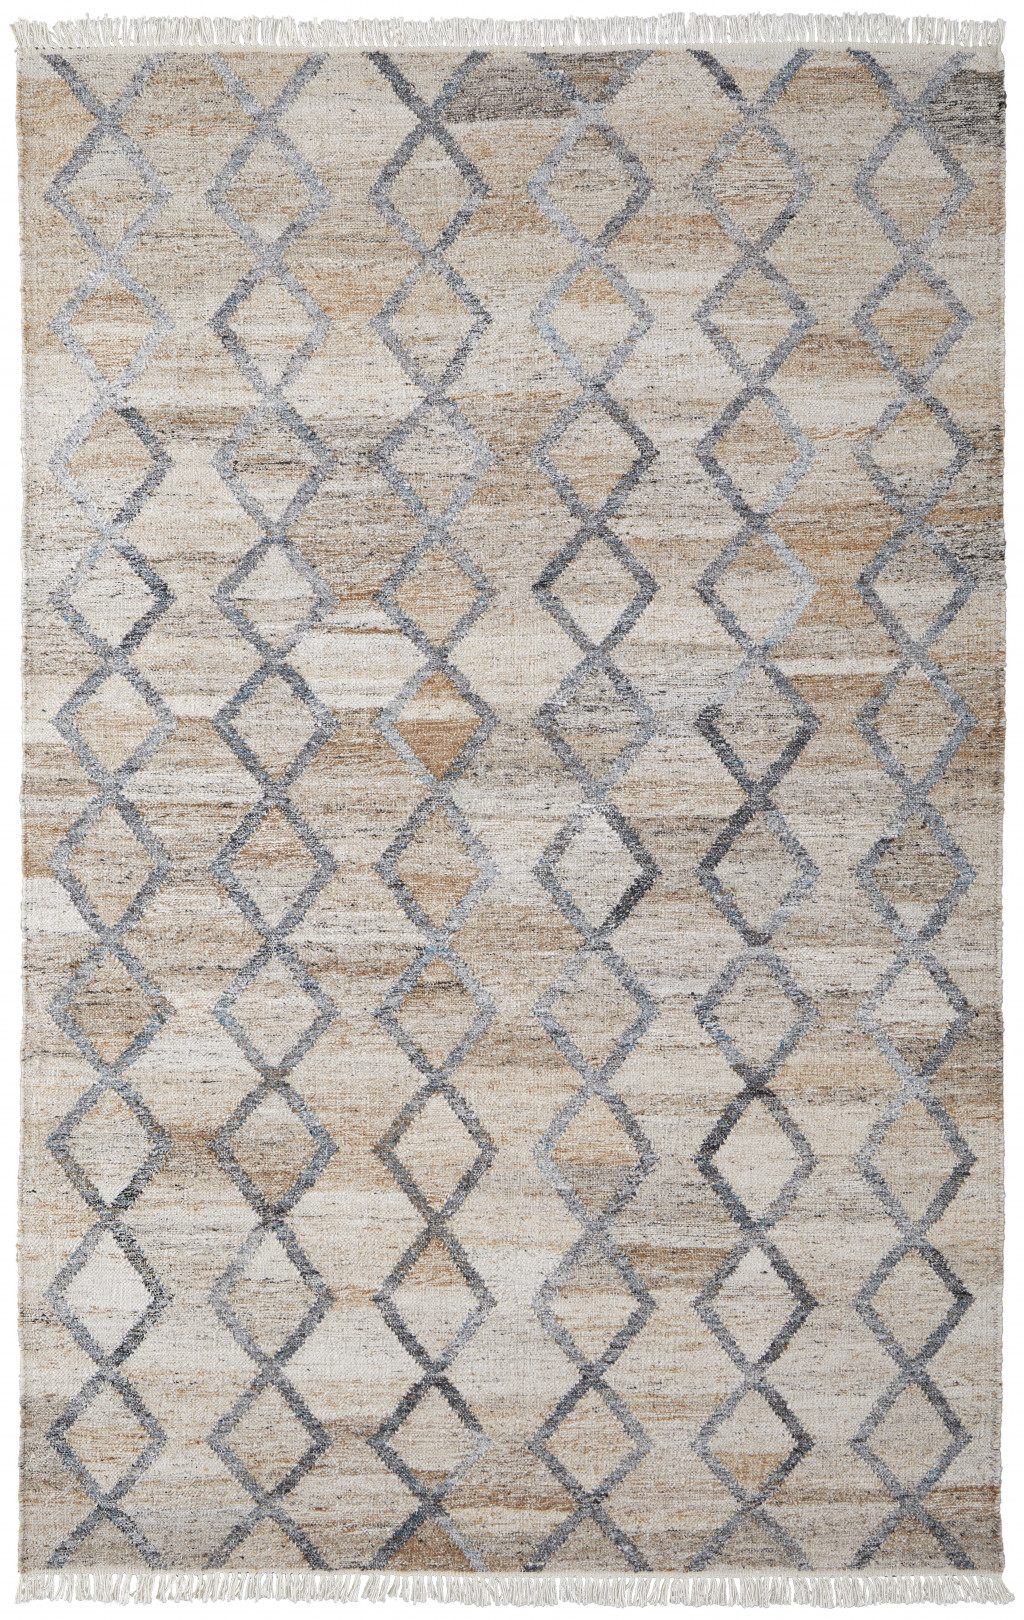 5' X 8' Gray Ivory And Tan Geometric Hand Woven Stain Resistant Area Rug With Fringe-512429-1